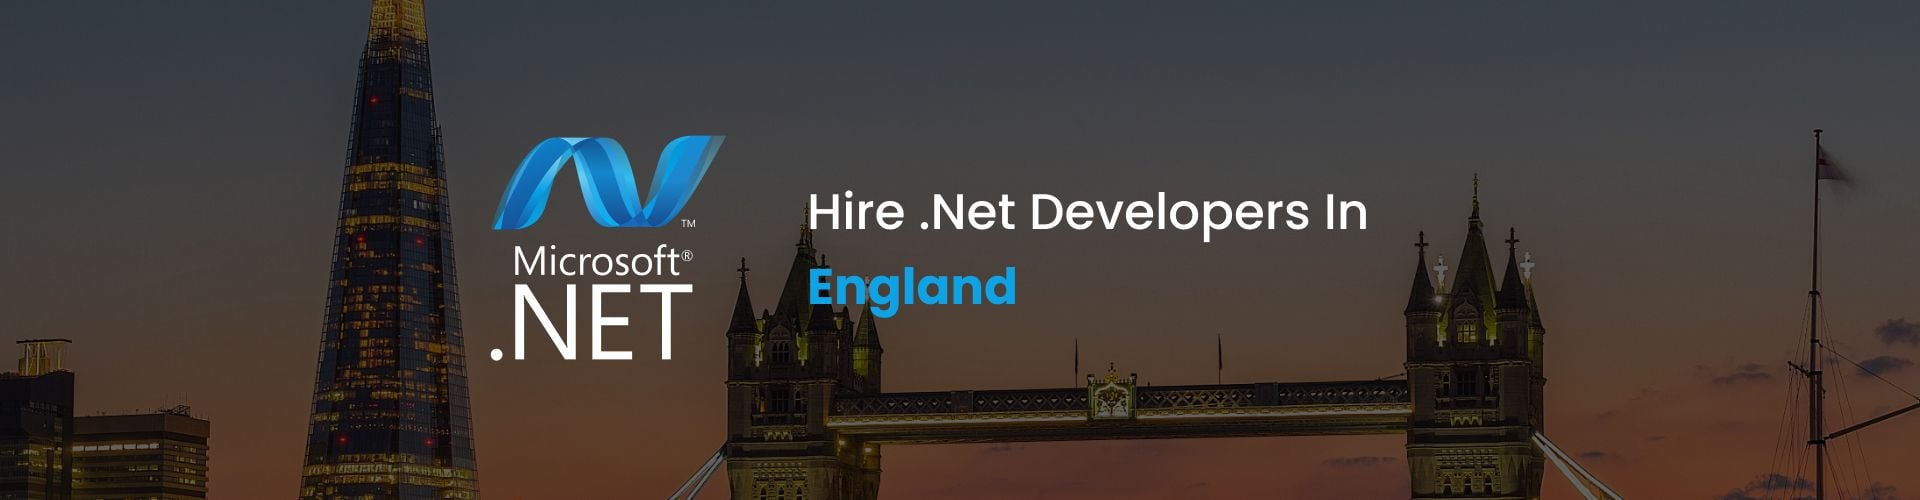 hire dot net developers in england